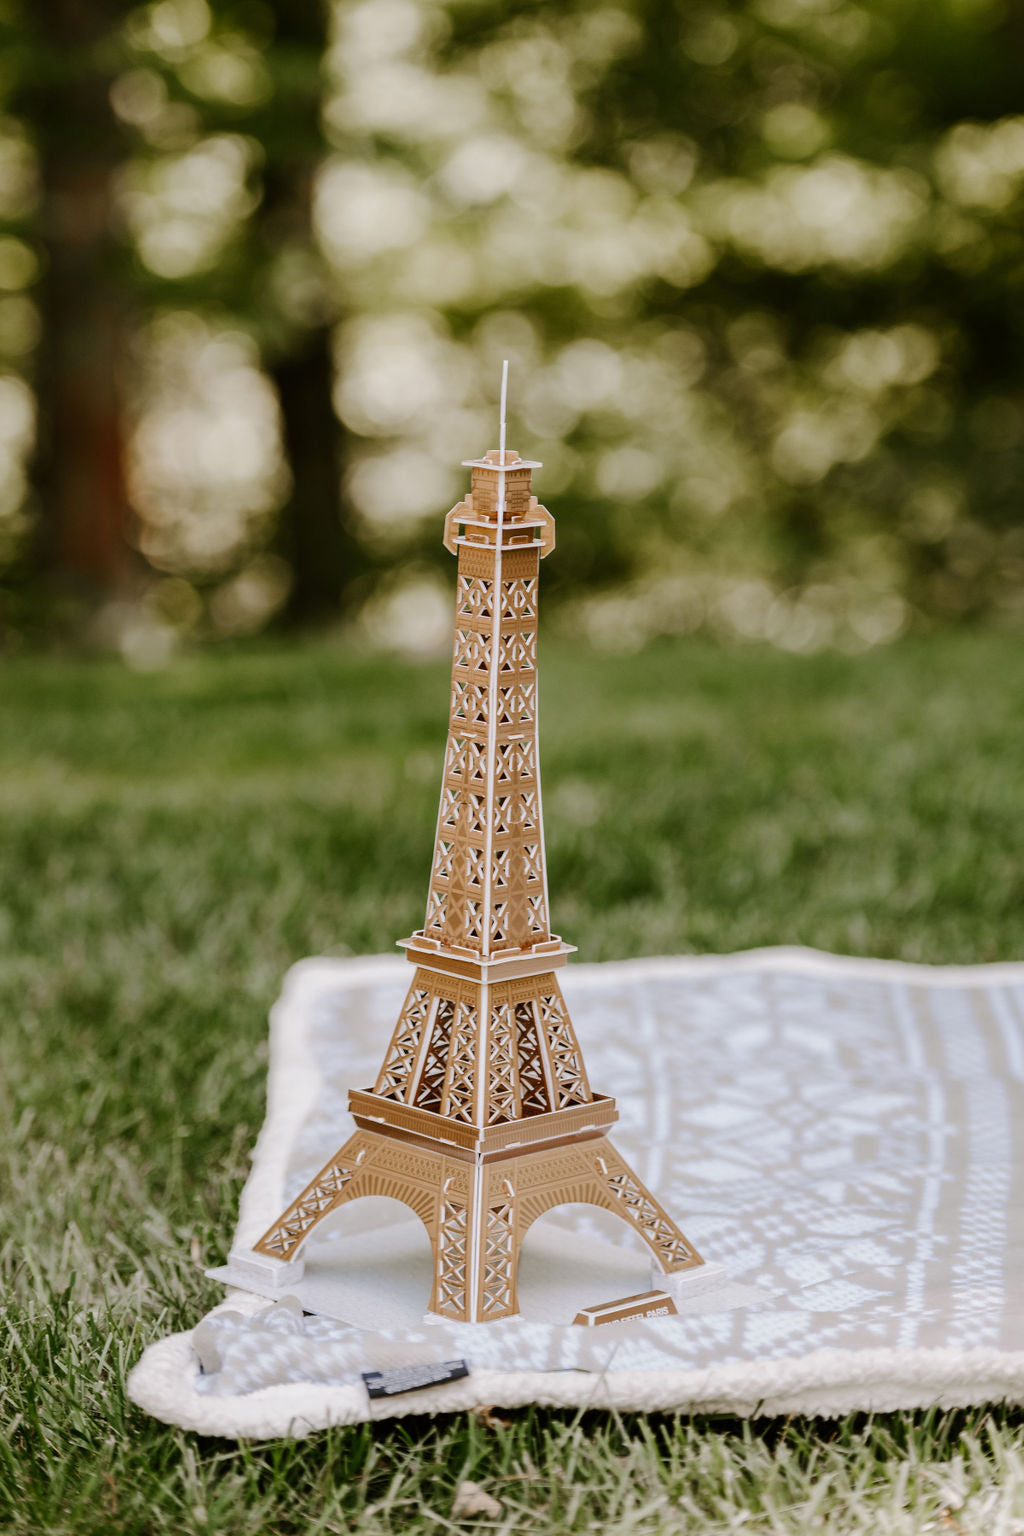 Little Learning Hands France Eiffel Tower 3D Puzzle | Eiffel Tower Architecture Model Building Kit